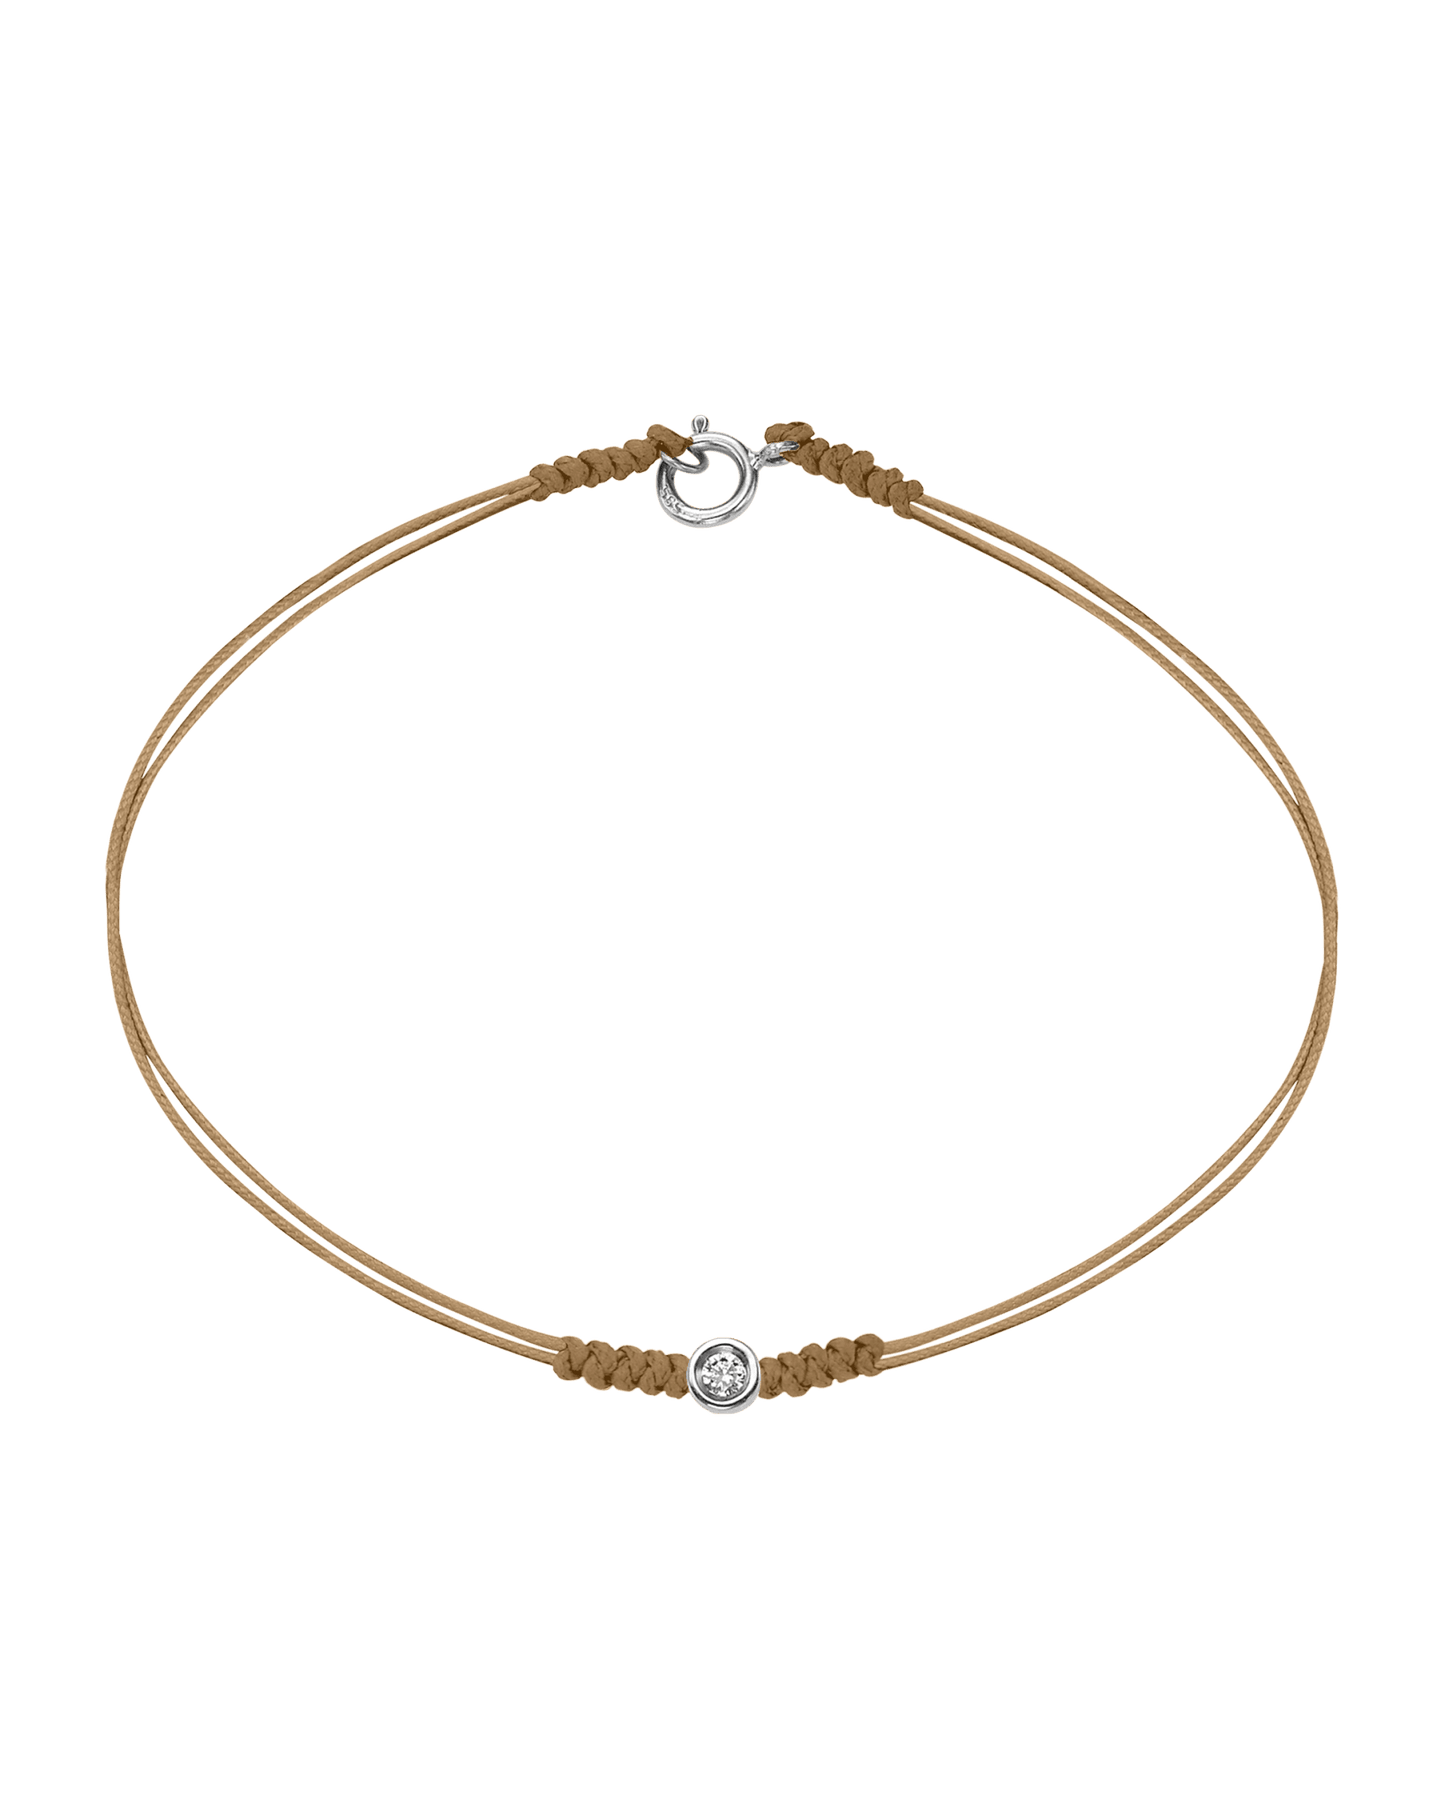 The Classic String of Love with clasp - 14K White Gold Bracelets 14K Solid Gold Camel Small: 0.03ct Small - 6 Inches (15.5cm)